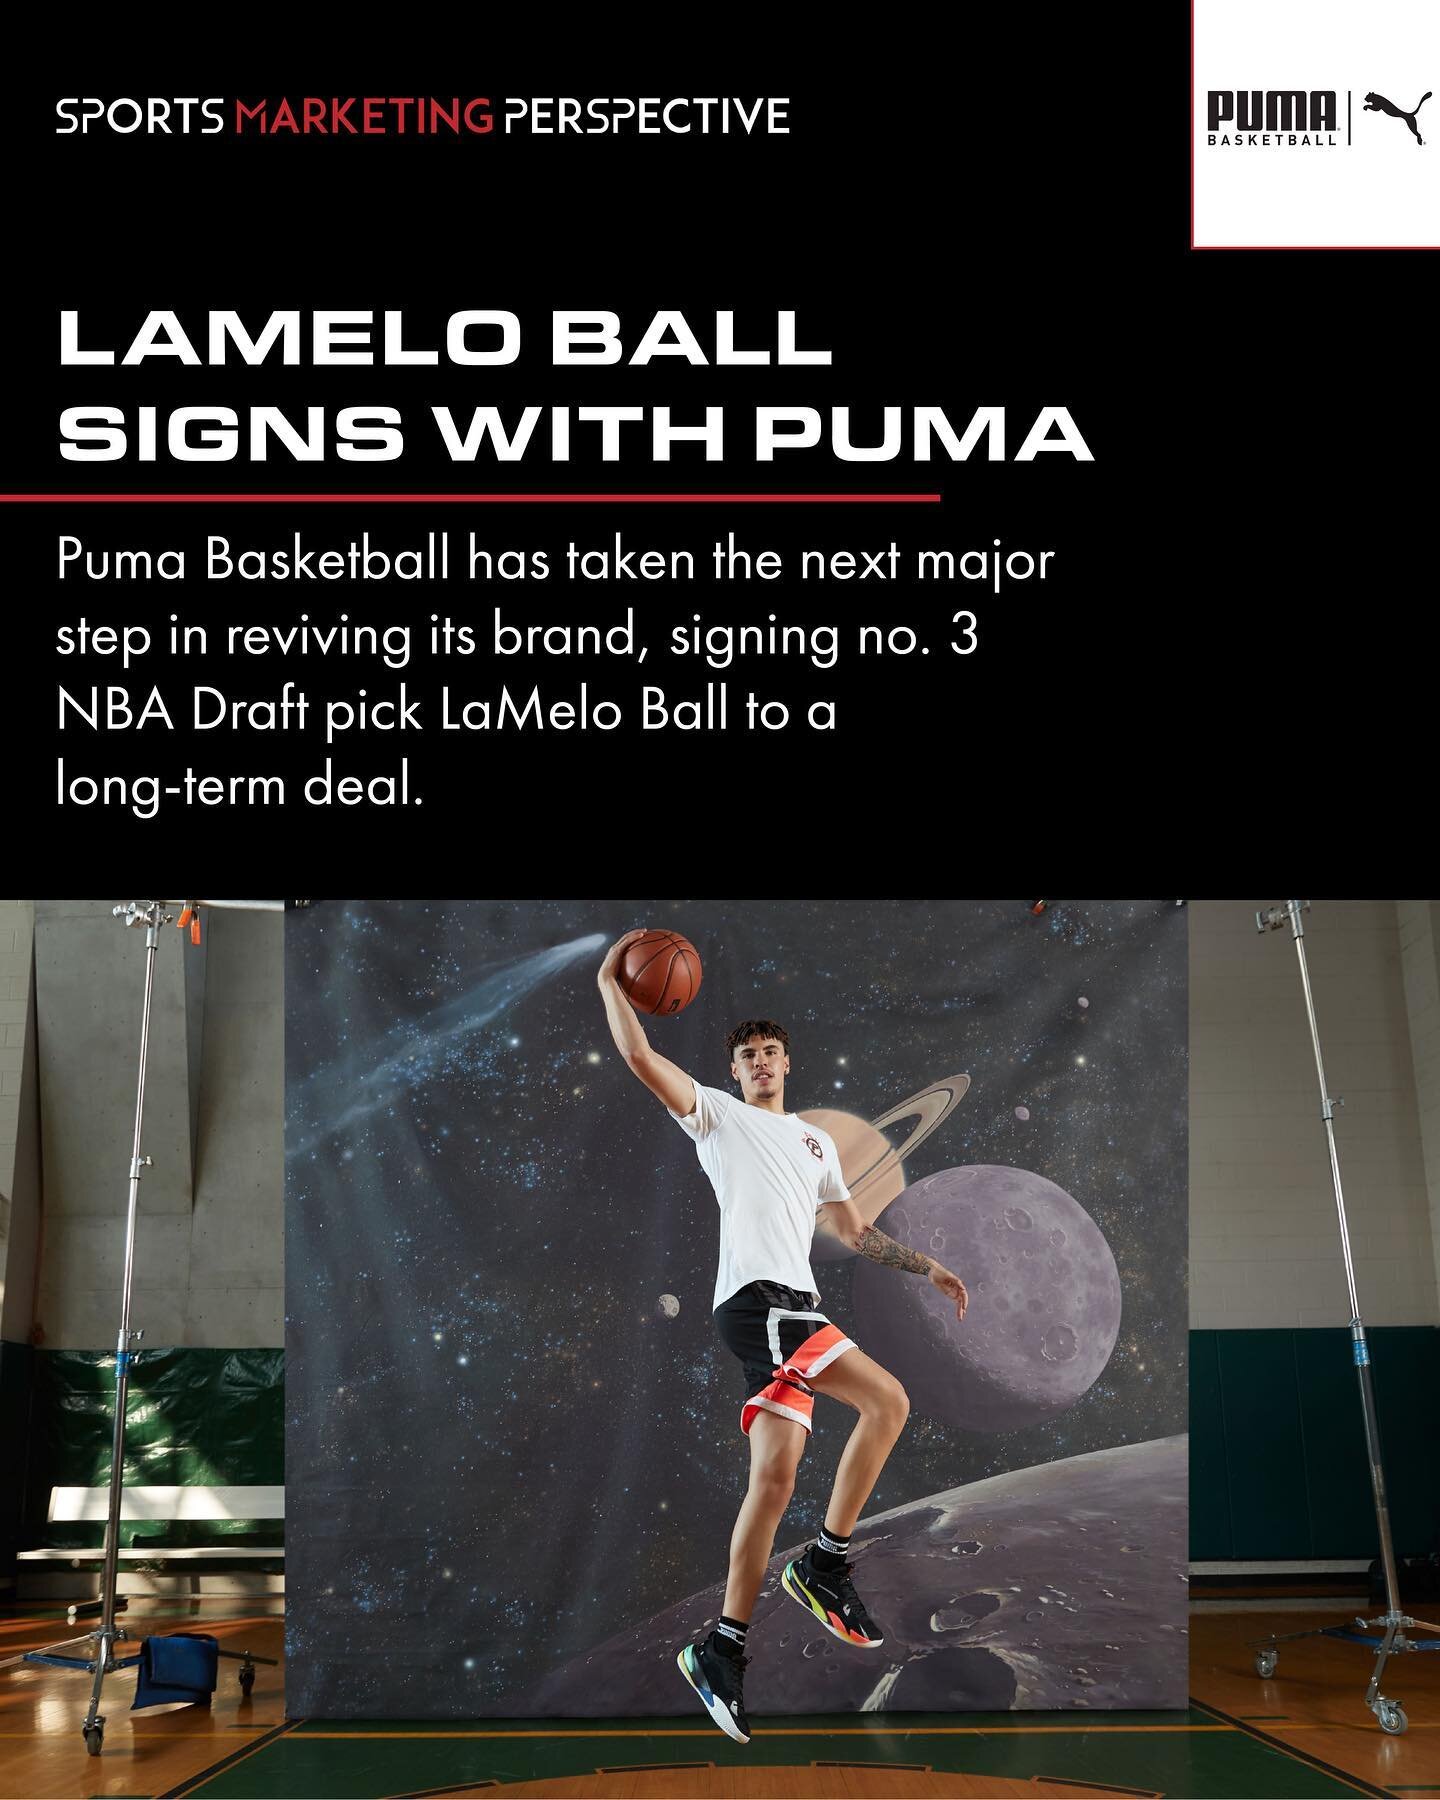 Reported in Oct., Puma Basketball reached long-term deal with now #NBADraft pick LaMelo Ball. The shoes deal is reportedly worth $100M.
-
The company then stated that it &ldquo;will collaborate with Ball to create products that incorporate PUMA&rsquo